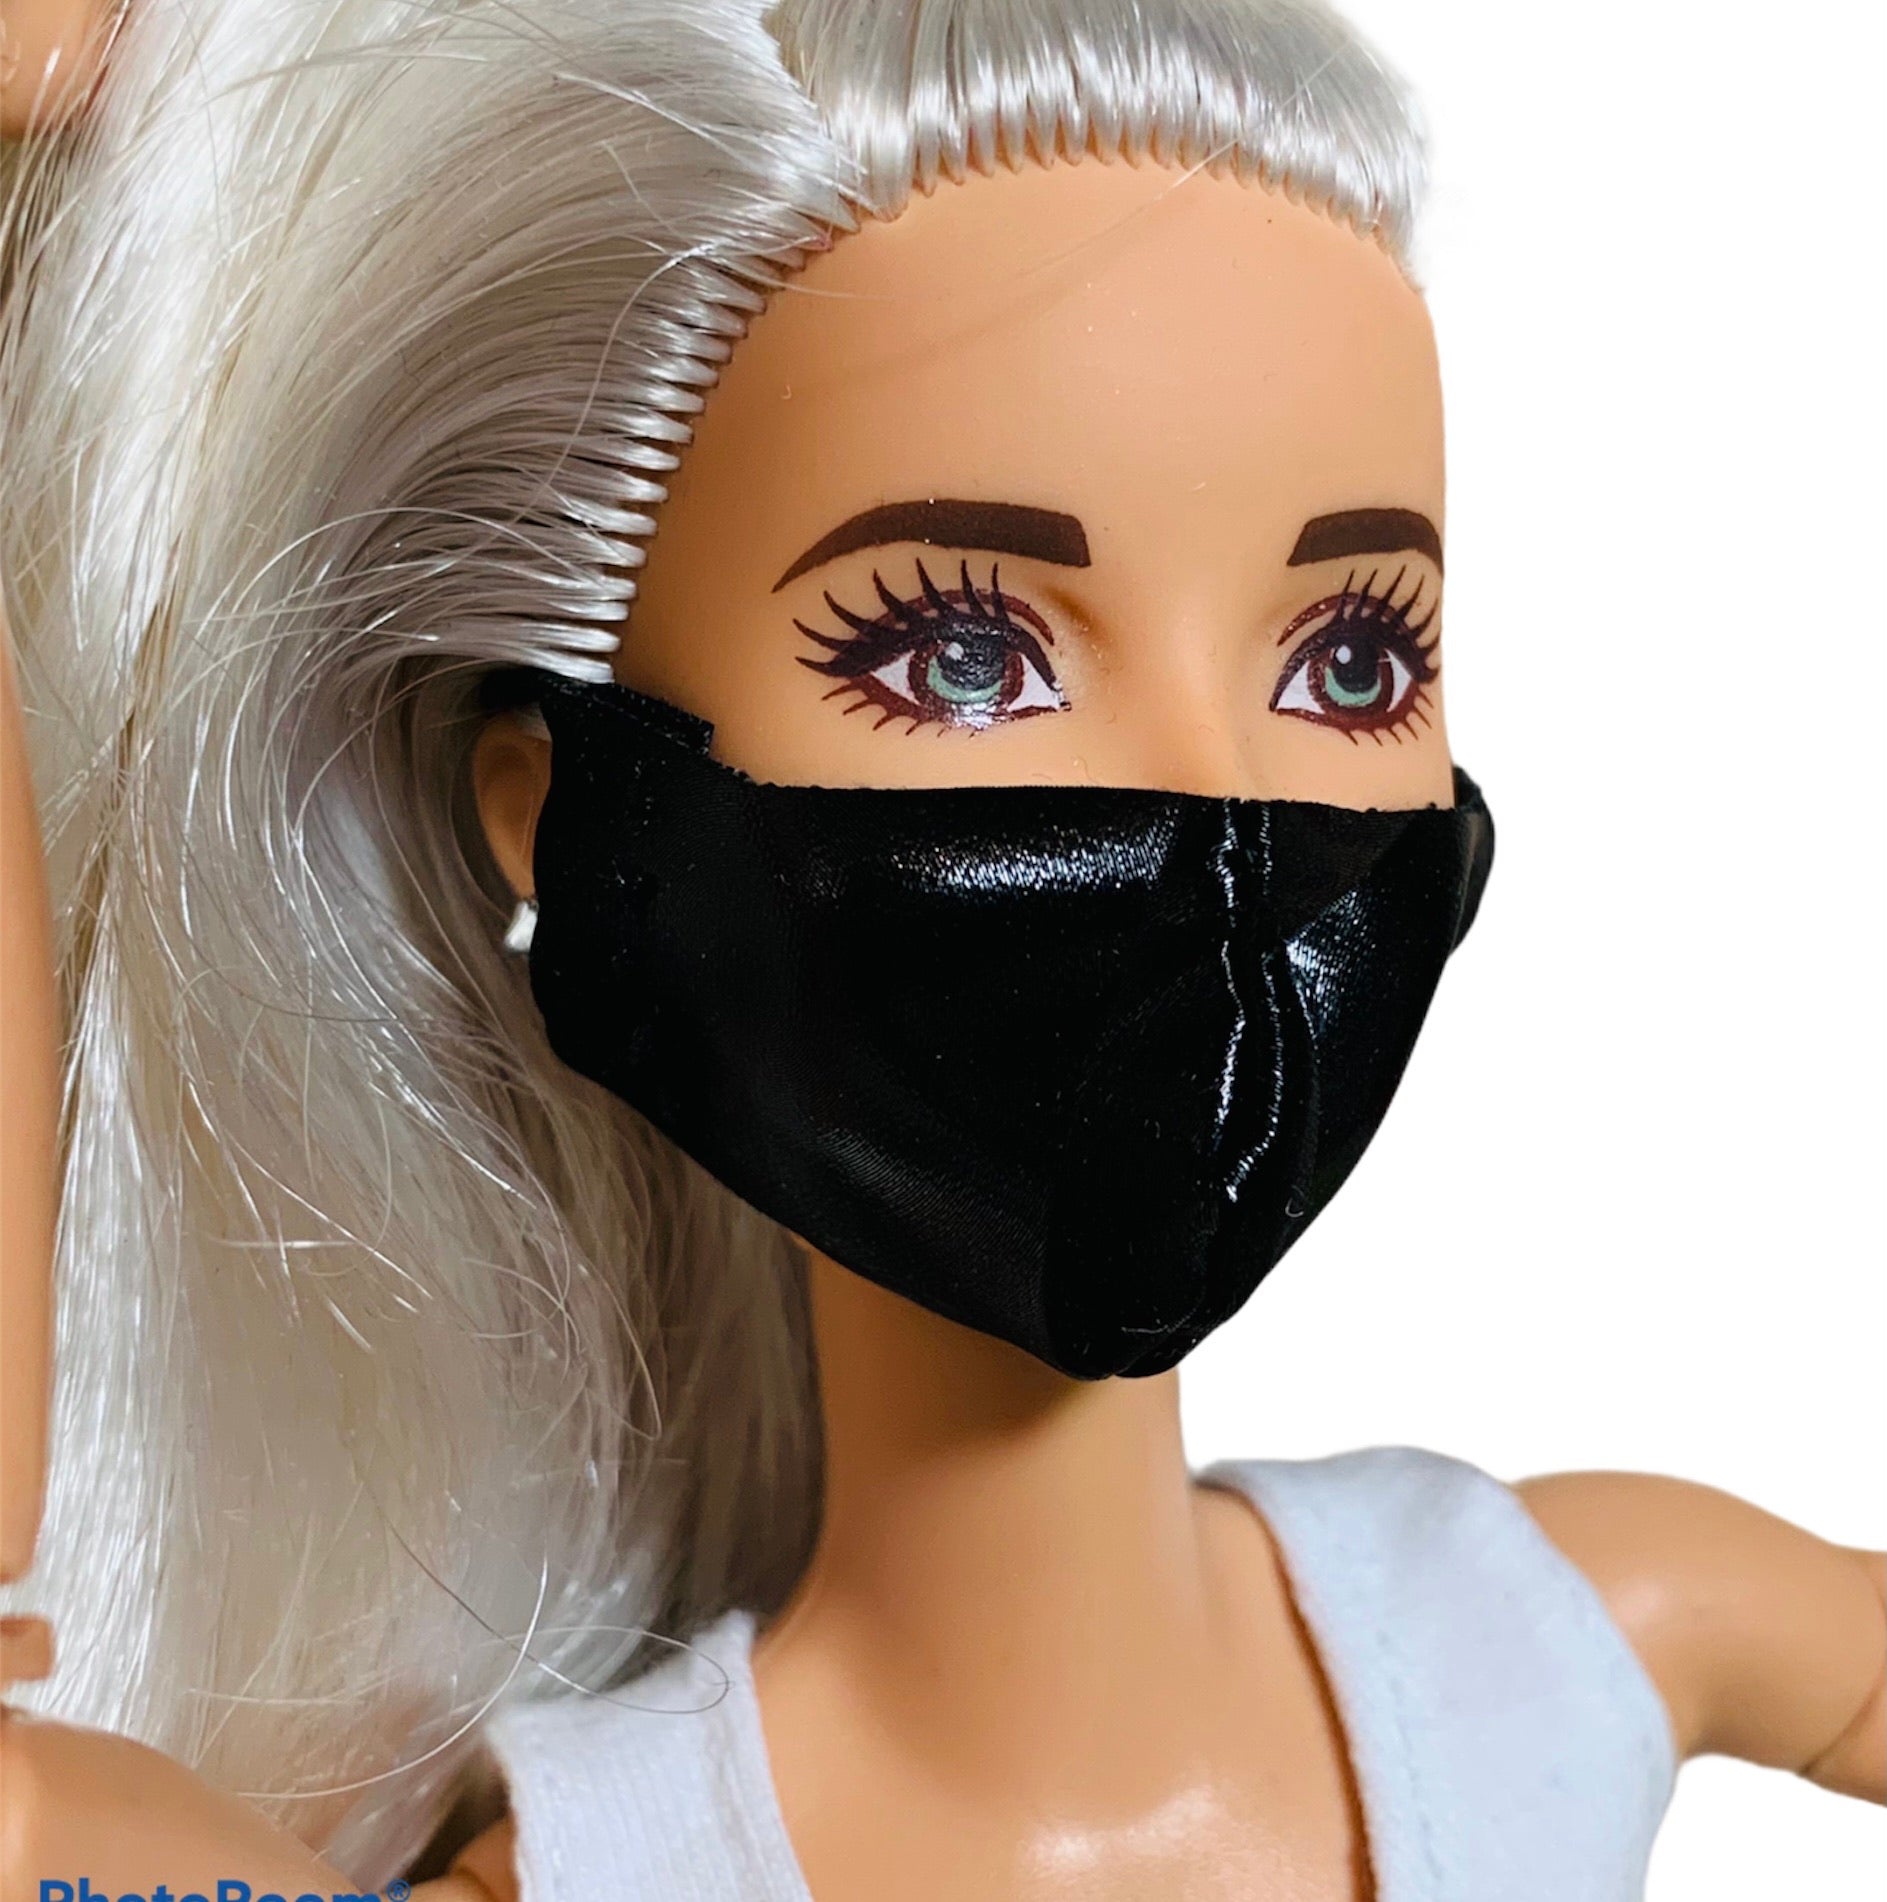 Stedord Opstå Garderobe Black Barbie doll face mask pleather face mask – The Doll Tailor